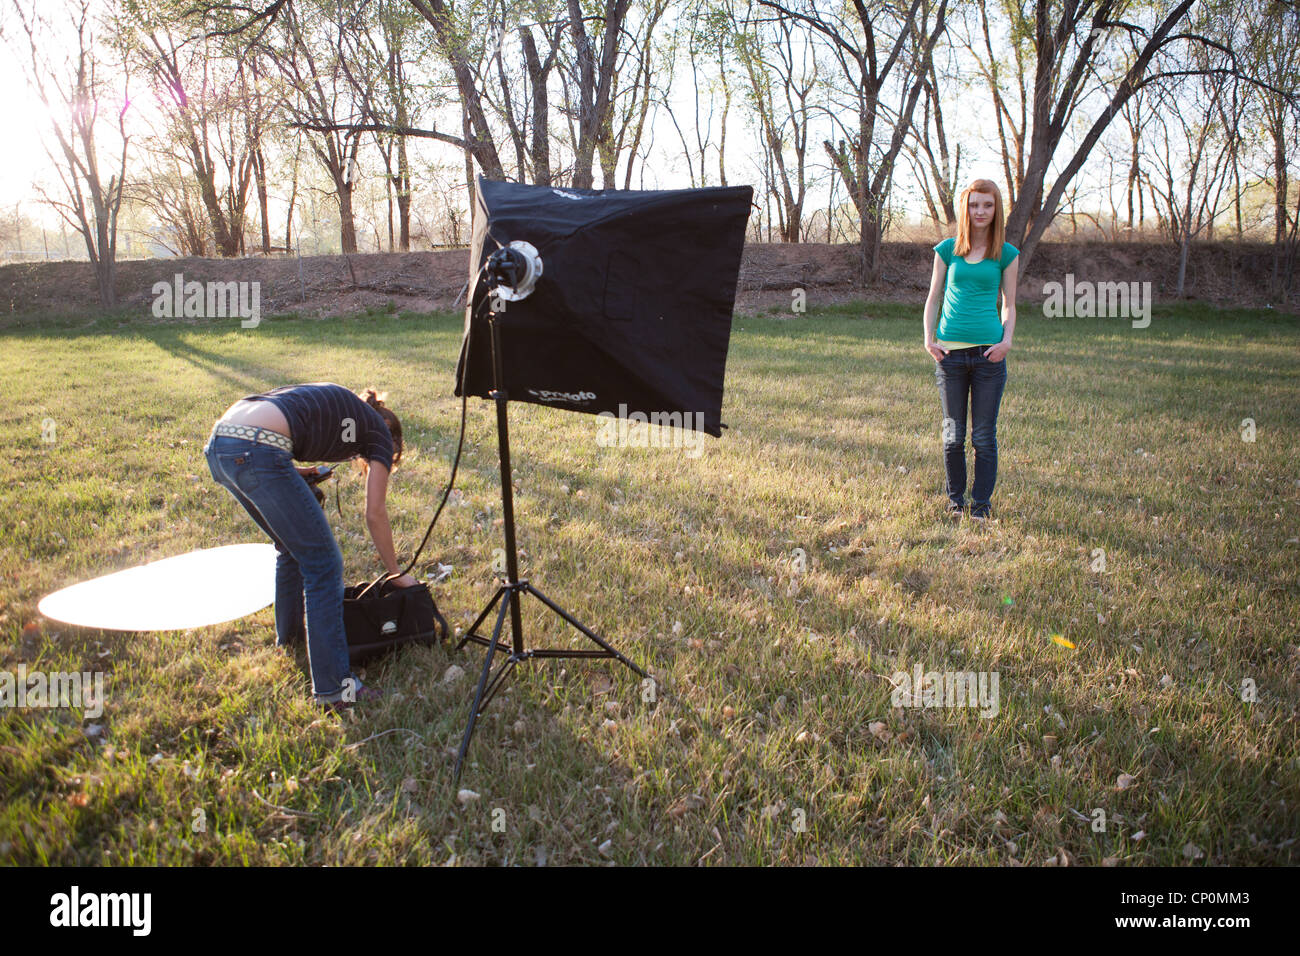 Photo shoot outdoors with teen model in a rural area. Stock Photo